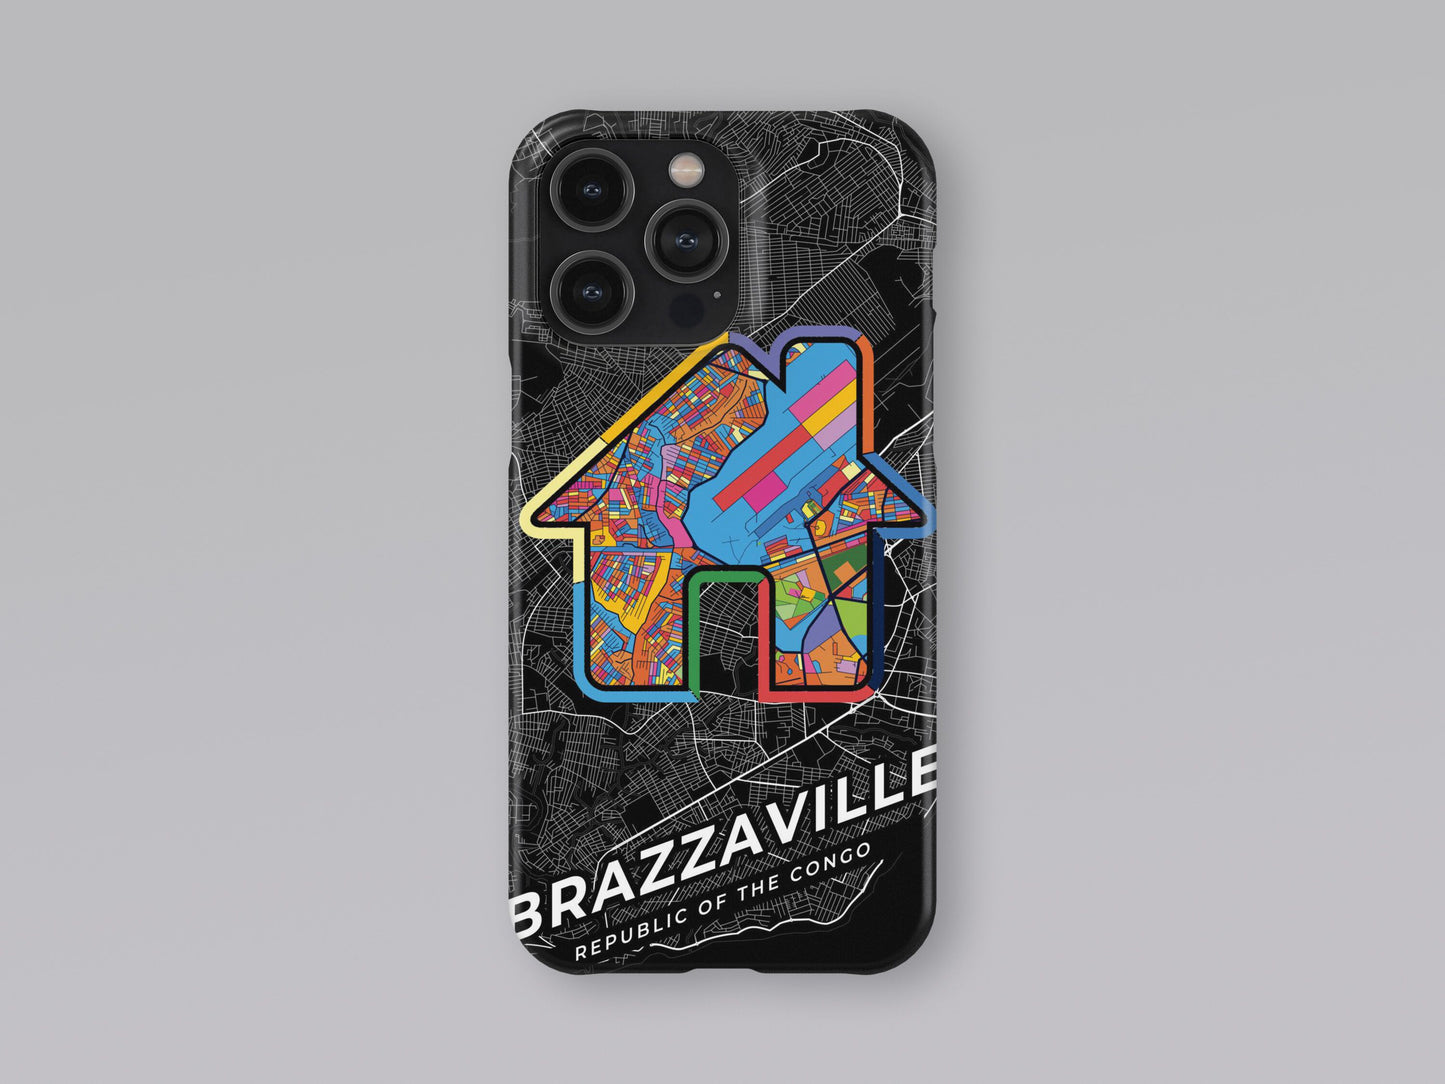 Brazzaville Republic Of The Congo slim phone case with colorful icon. Birthday, wedding or housewarming gift. Couple match cases. 3